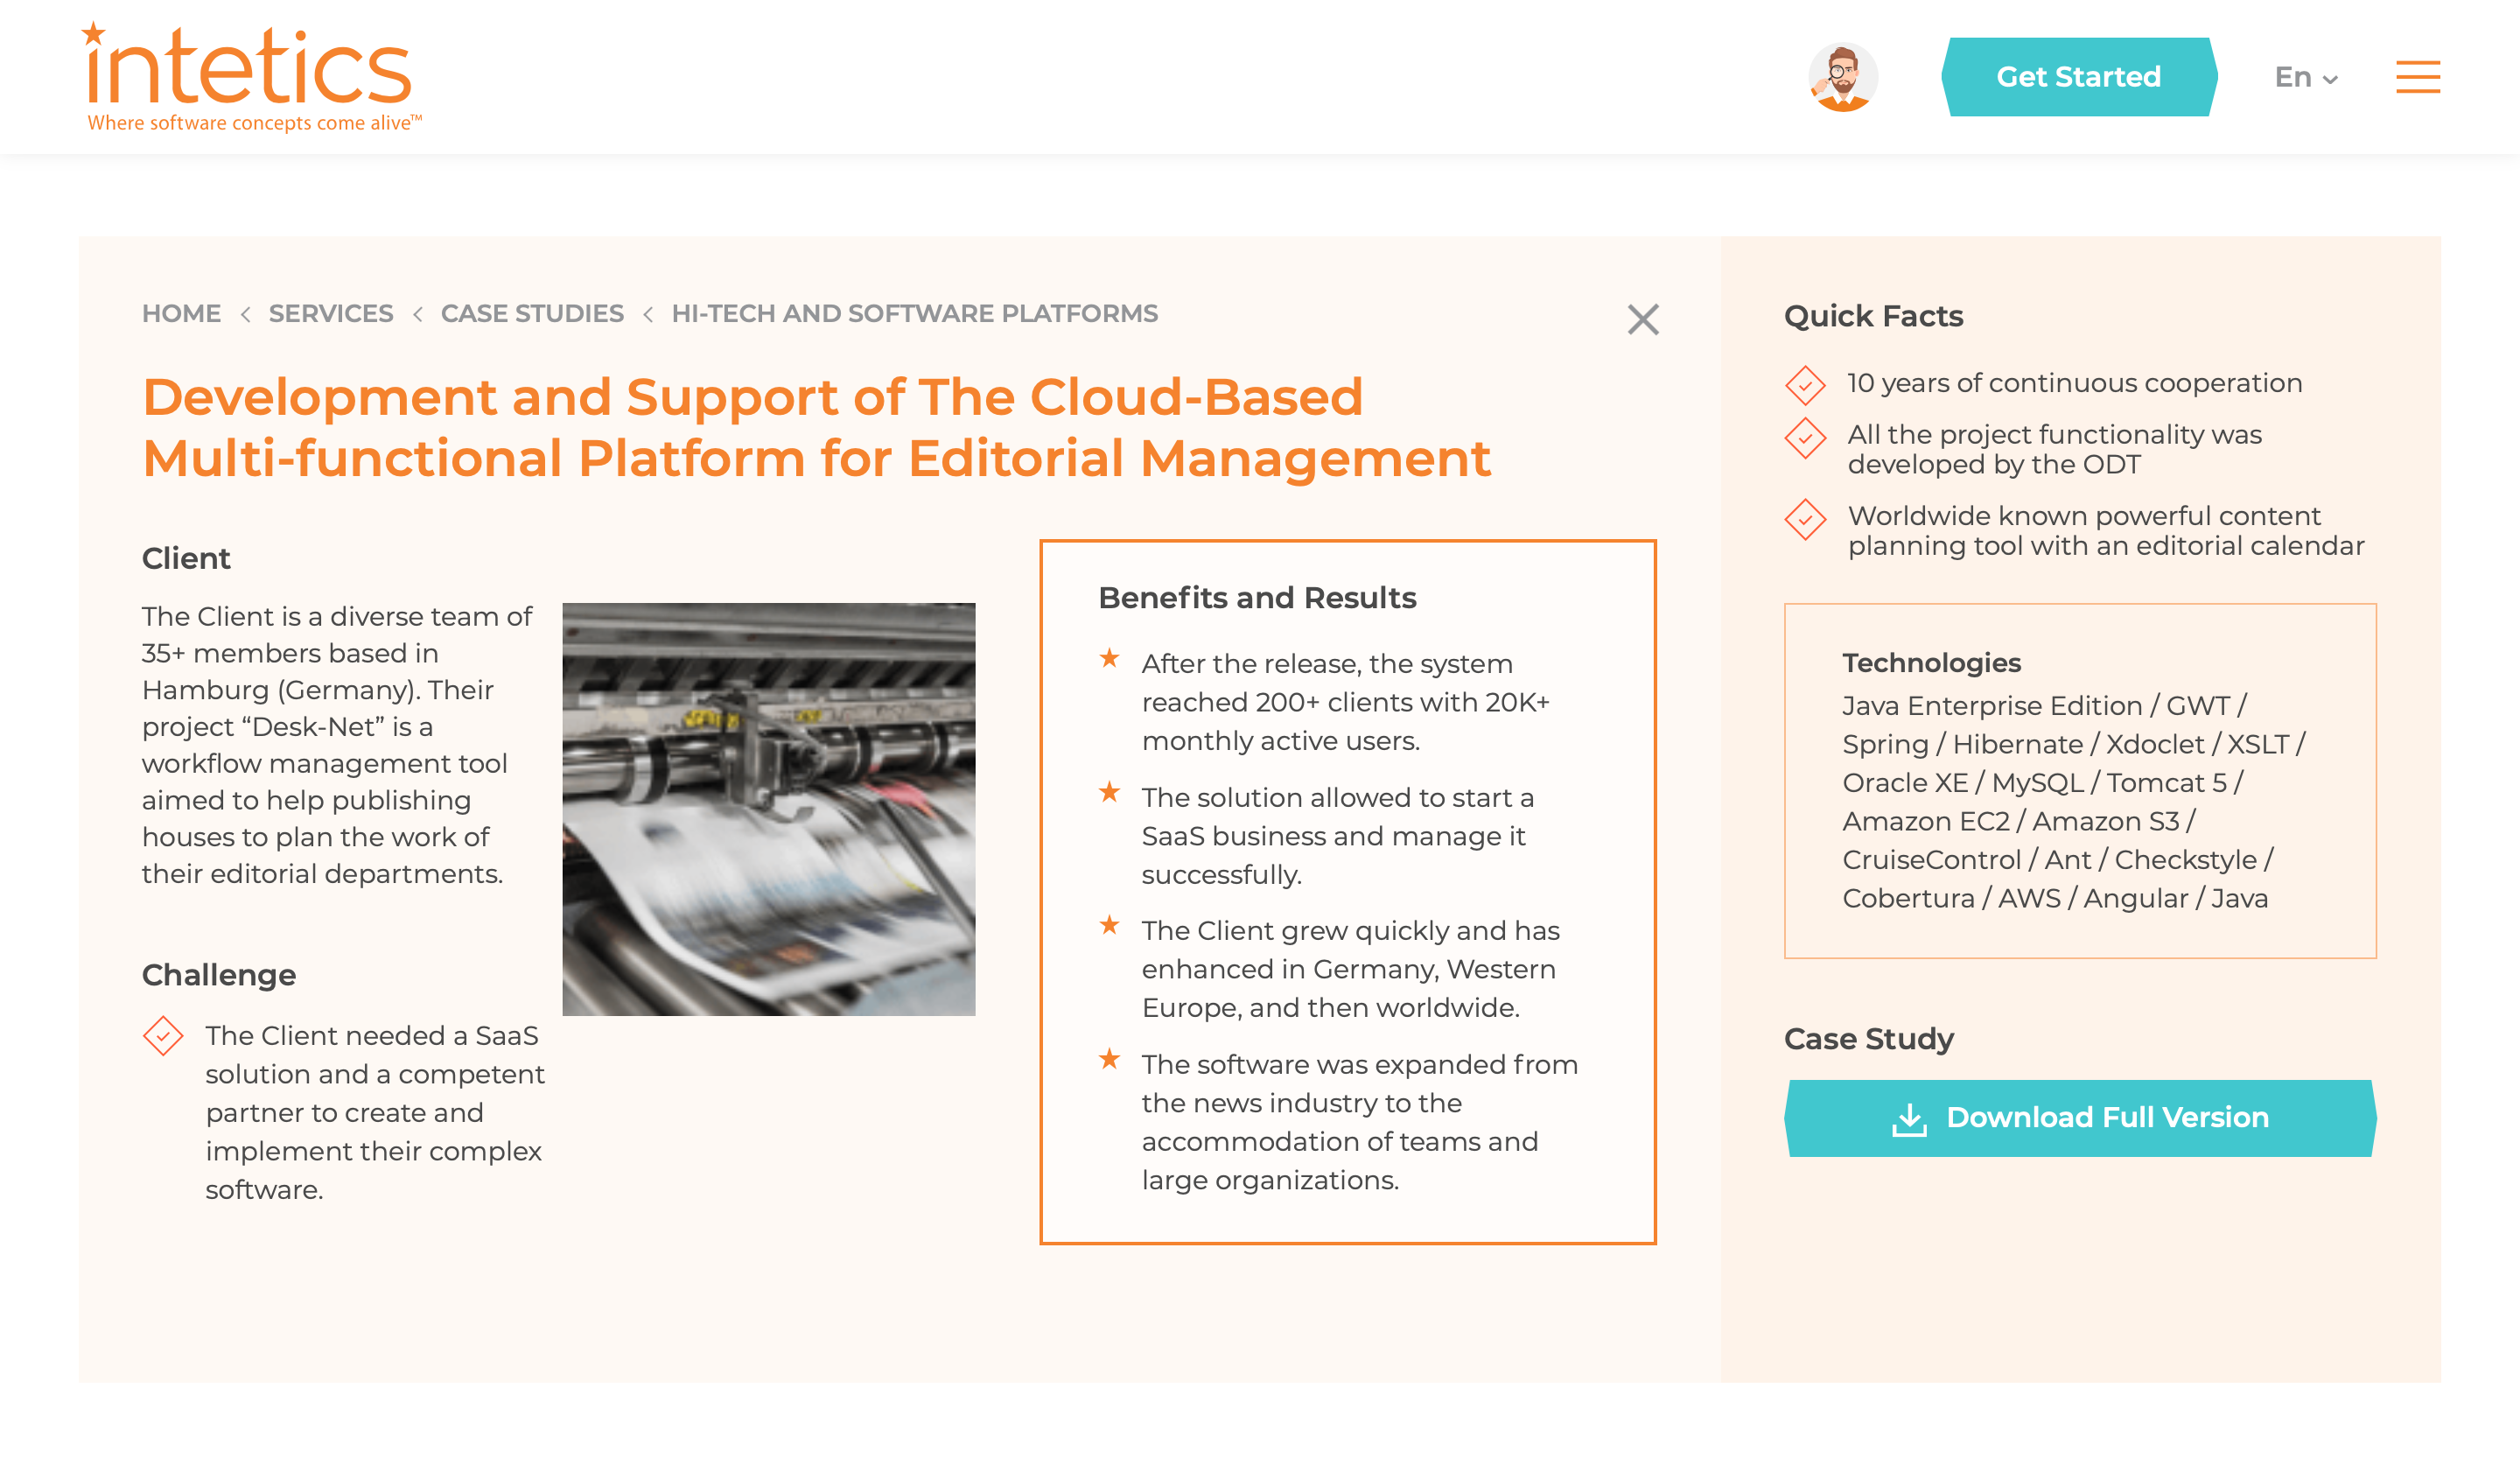 Development and Support of The Cloud-Based Multi-functional Platform for Editorial Management